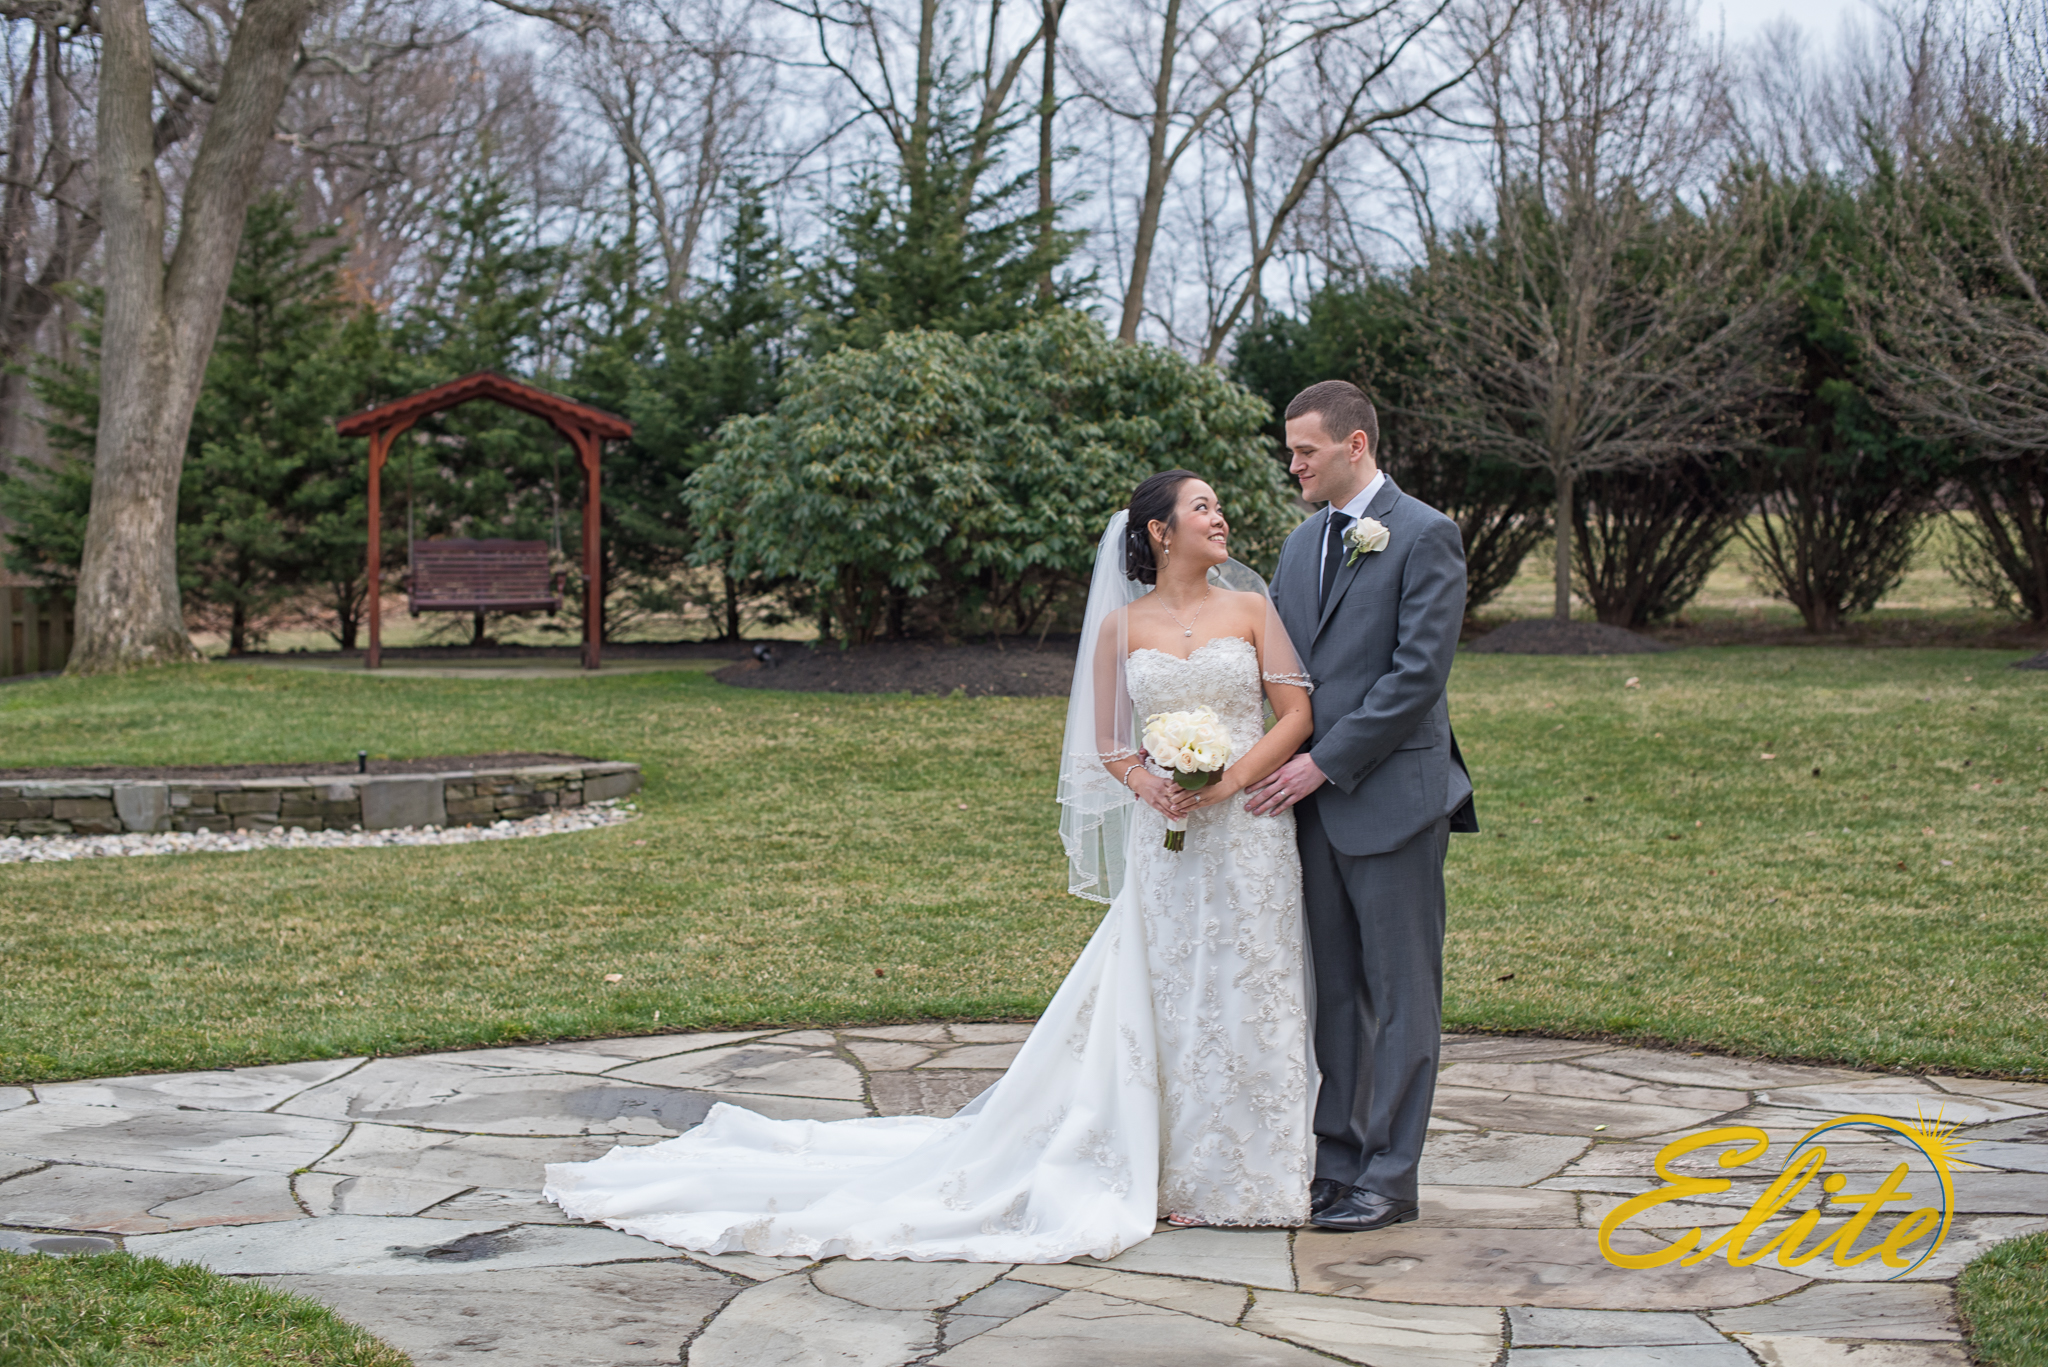 Outdoor photos at The English Manor are a must. The grounds are so beautiful!